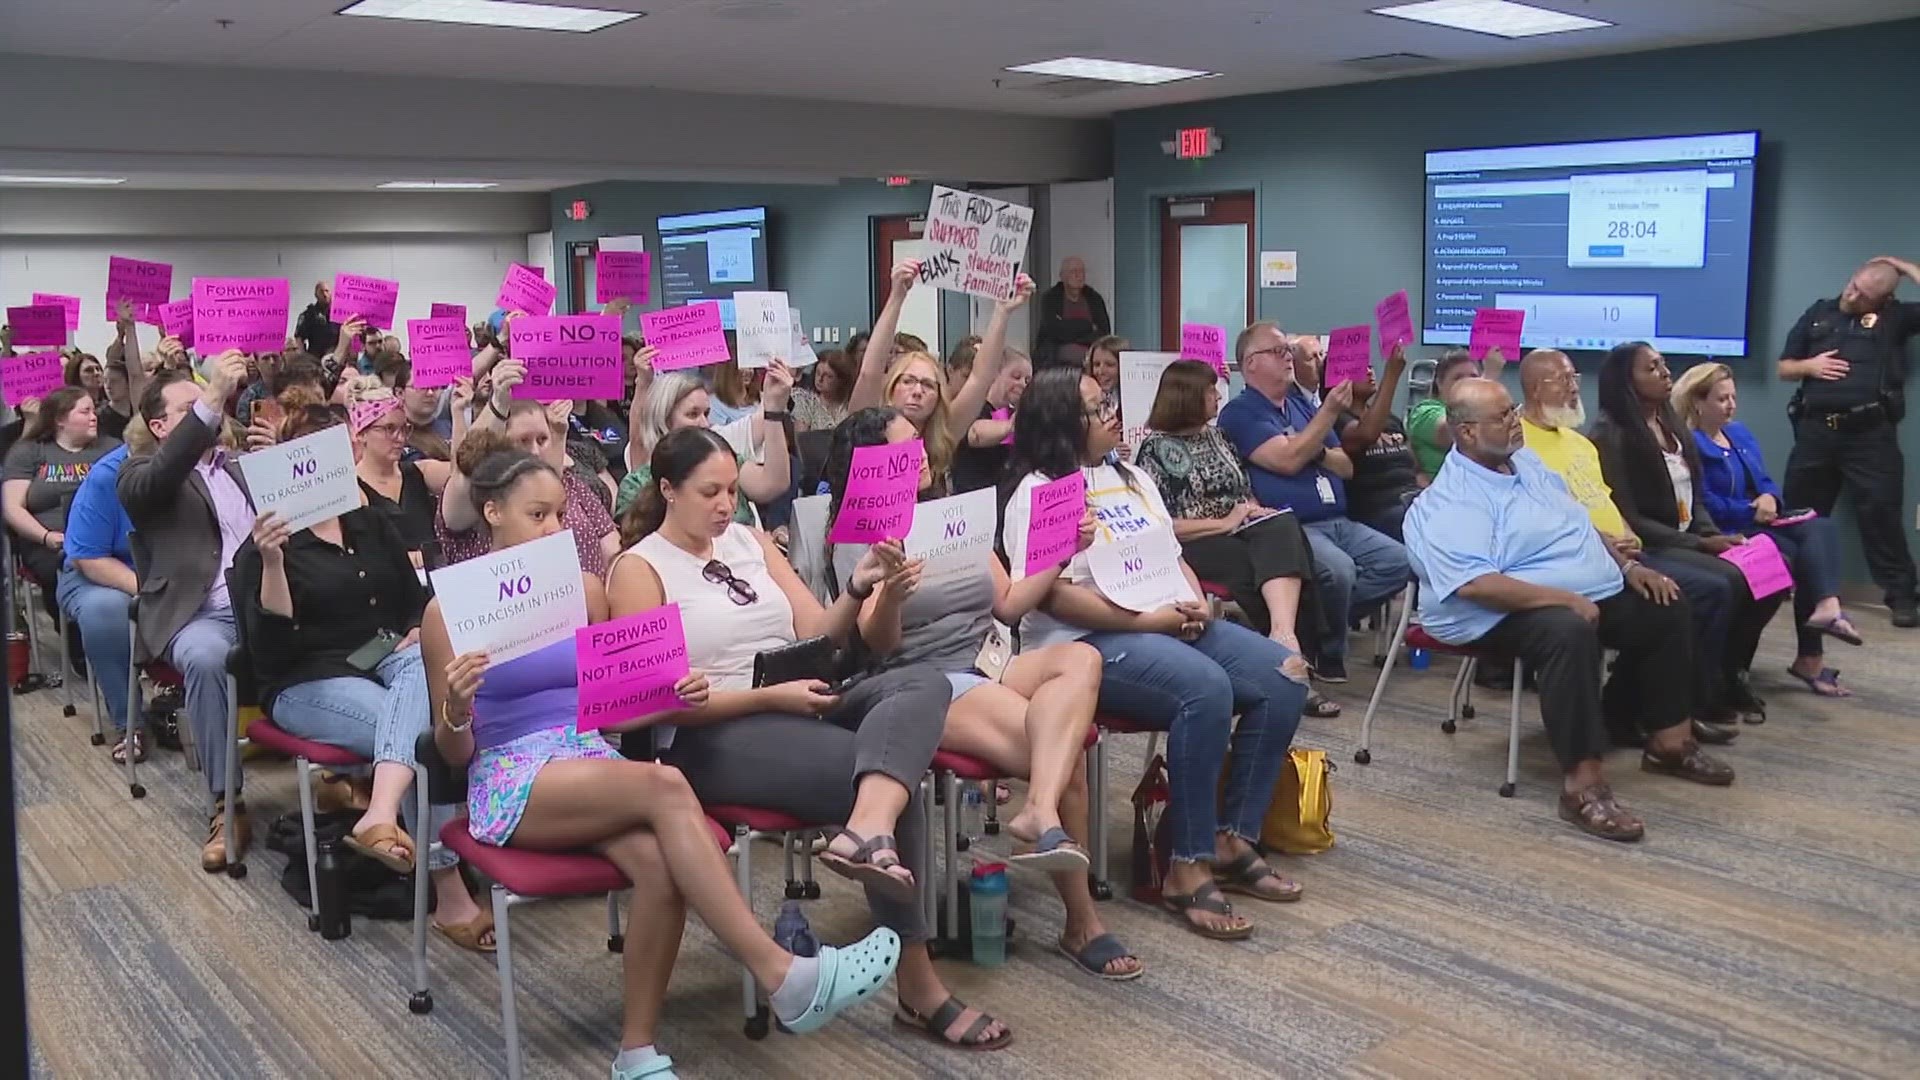 After hearing from multiple parents and more than two hours, the school board voted five to 2 and passed the proposal.